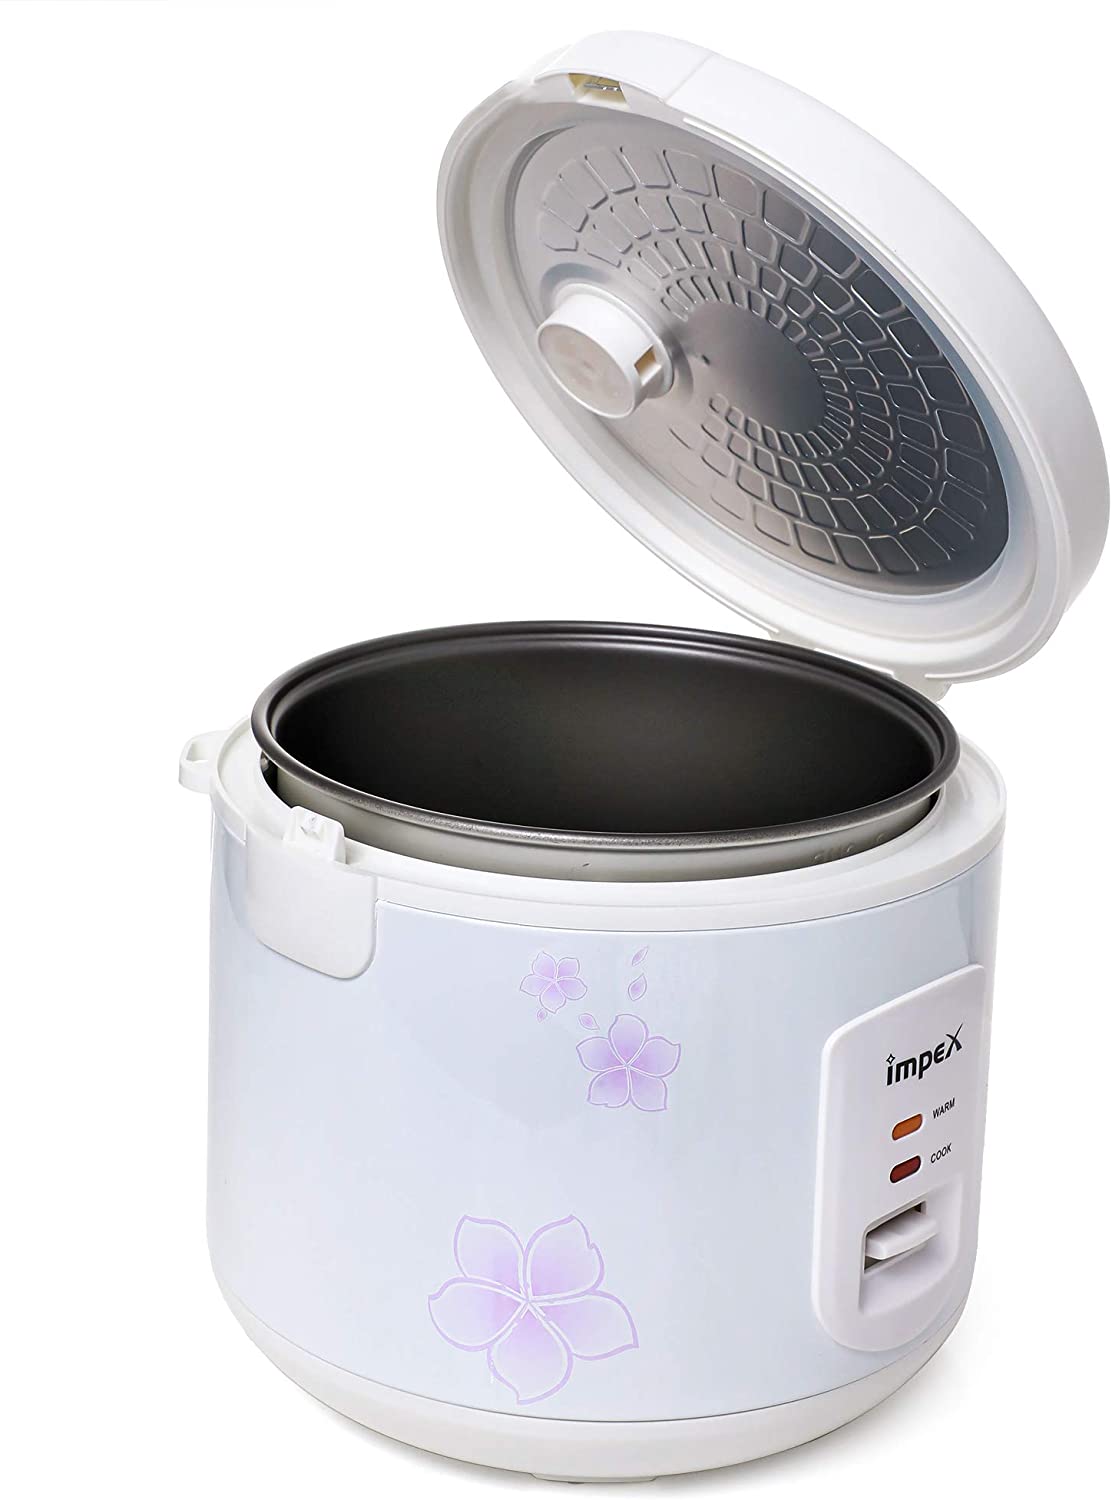 Impex RC 2803 700W Automatic Electric Rice Cooker 1.8 Liter with Aluminium Inner pot Safety Protection heating Coil